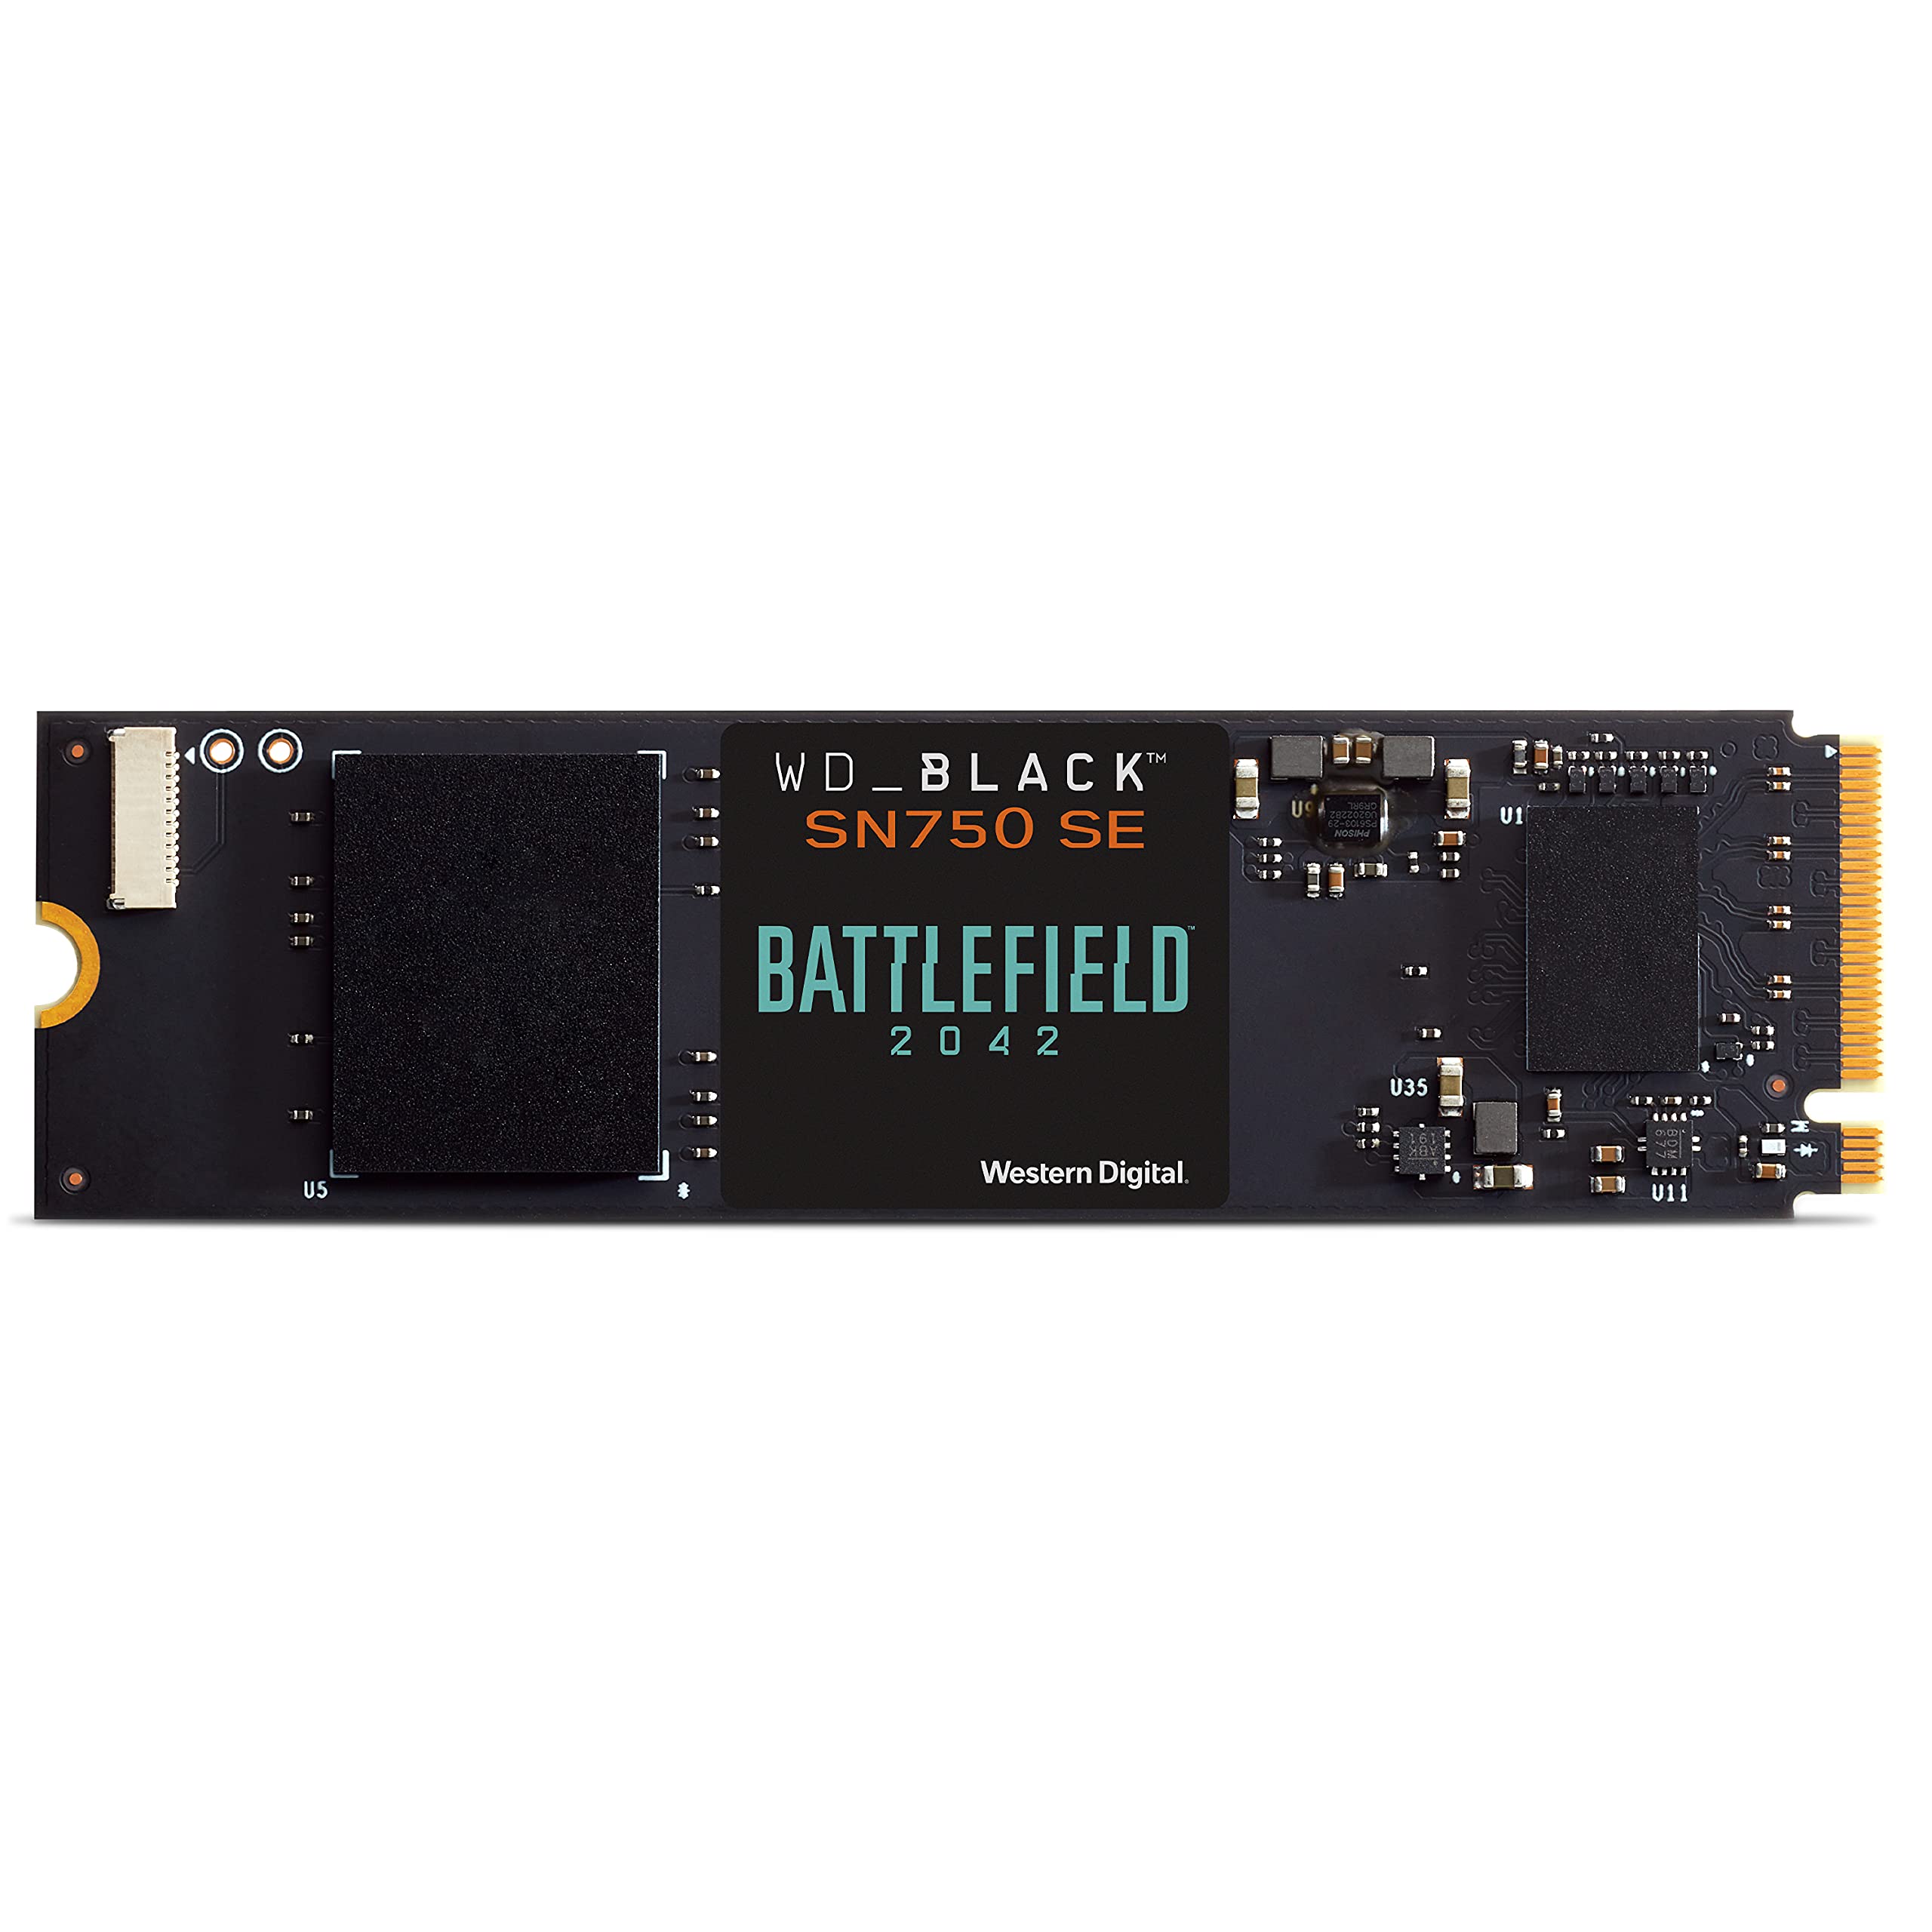 WD_BLACK 1TB SN750 SE NVMe SSD with Battlefield 2042 Game Code Bundle - Gen4 PCle, Internal Gaming SSD Solid State Drive, M.2 2280, Up to 3,600 MB/s - WDBB9J0010BNC-NRSN